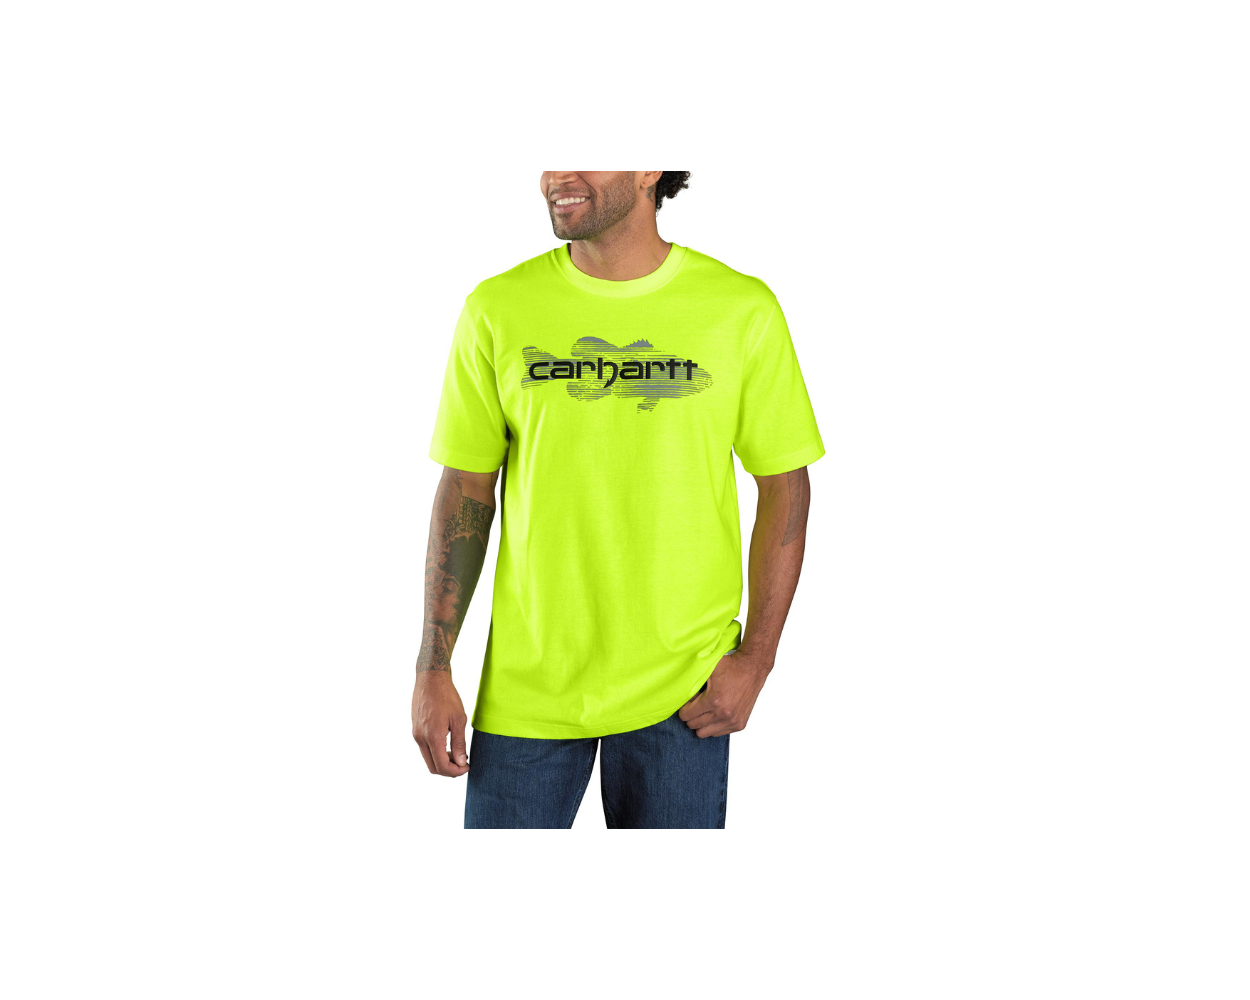 Carhartt Men's Loose Fit Heavyweight Short-Sleeve Fish Graphic T-Shirt - Bright Lime